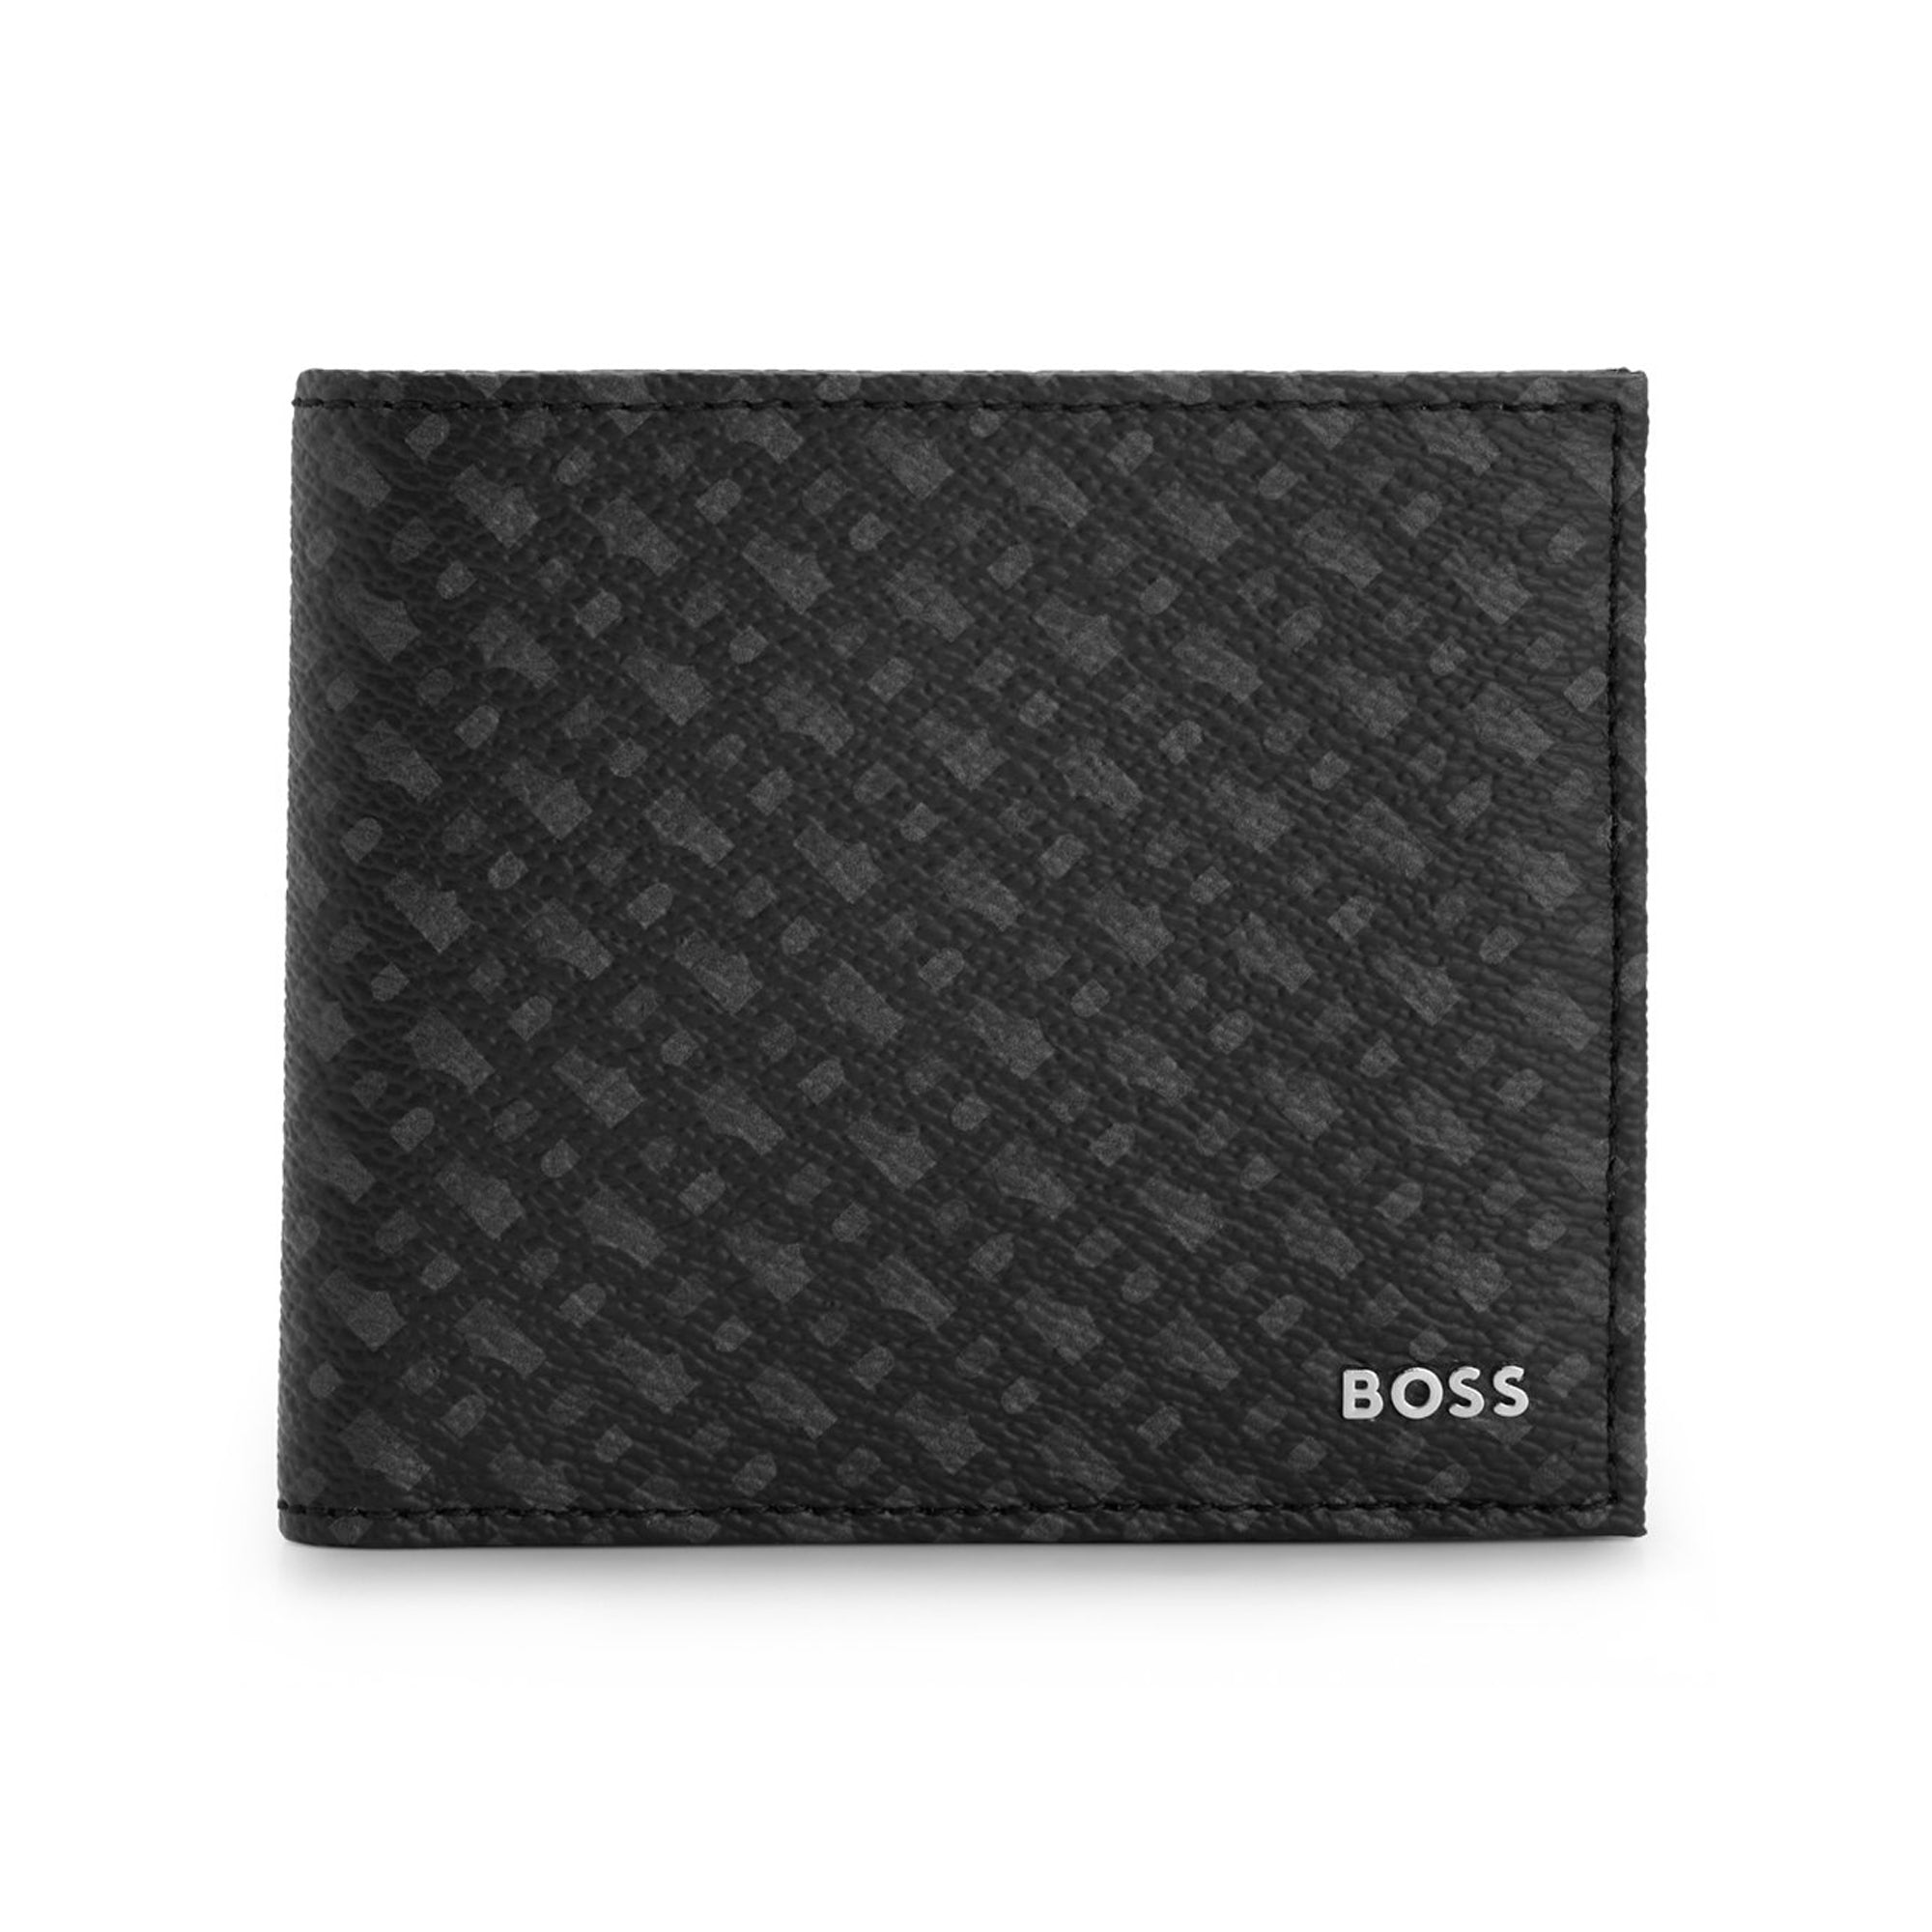 Boss Byron RFID 4 Card and Coin Wallet - Black/Grey AOP